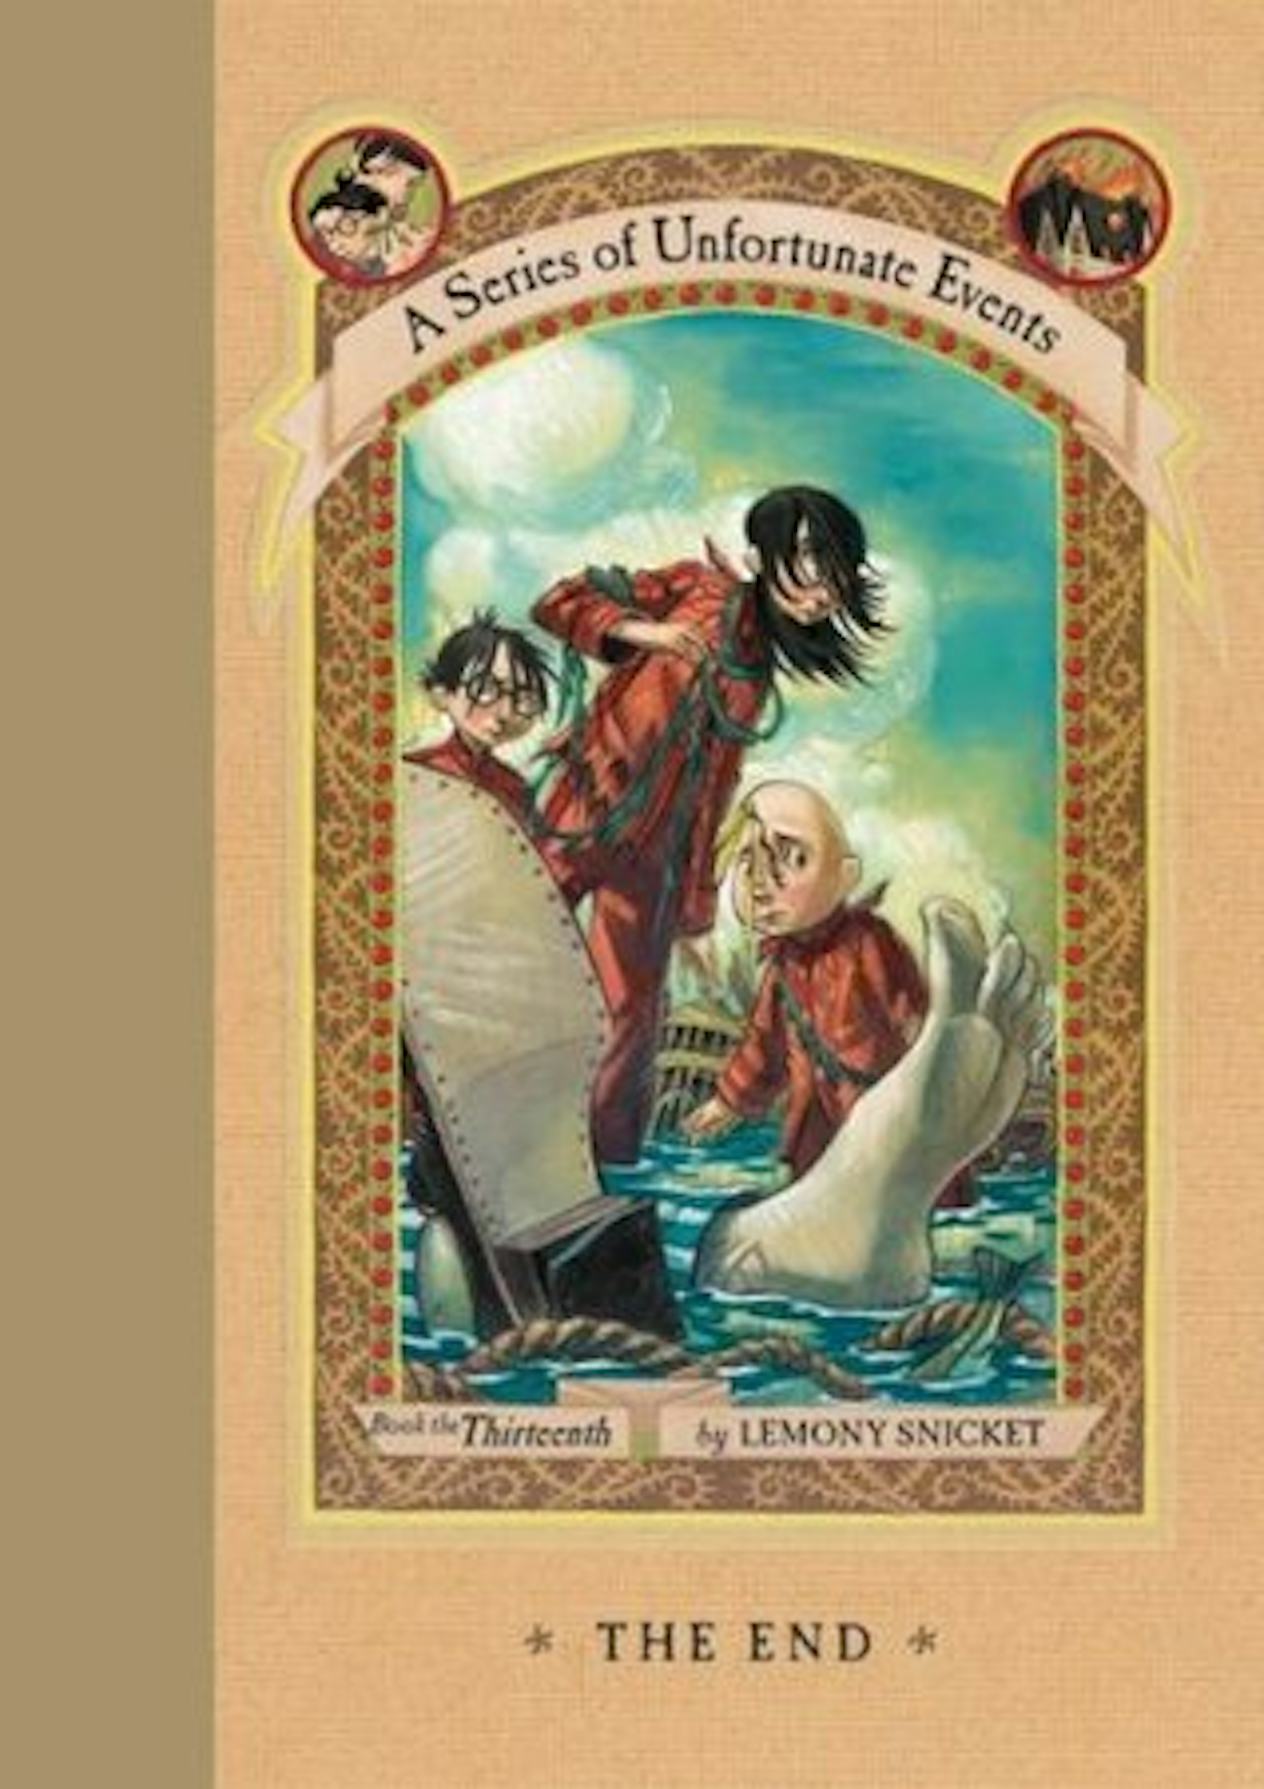 What Happened In 'A Series of Unfortunate Events'? A Full Recap Of The